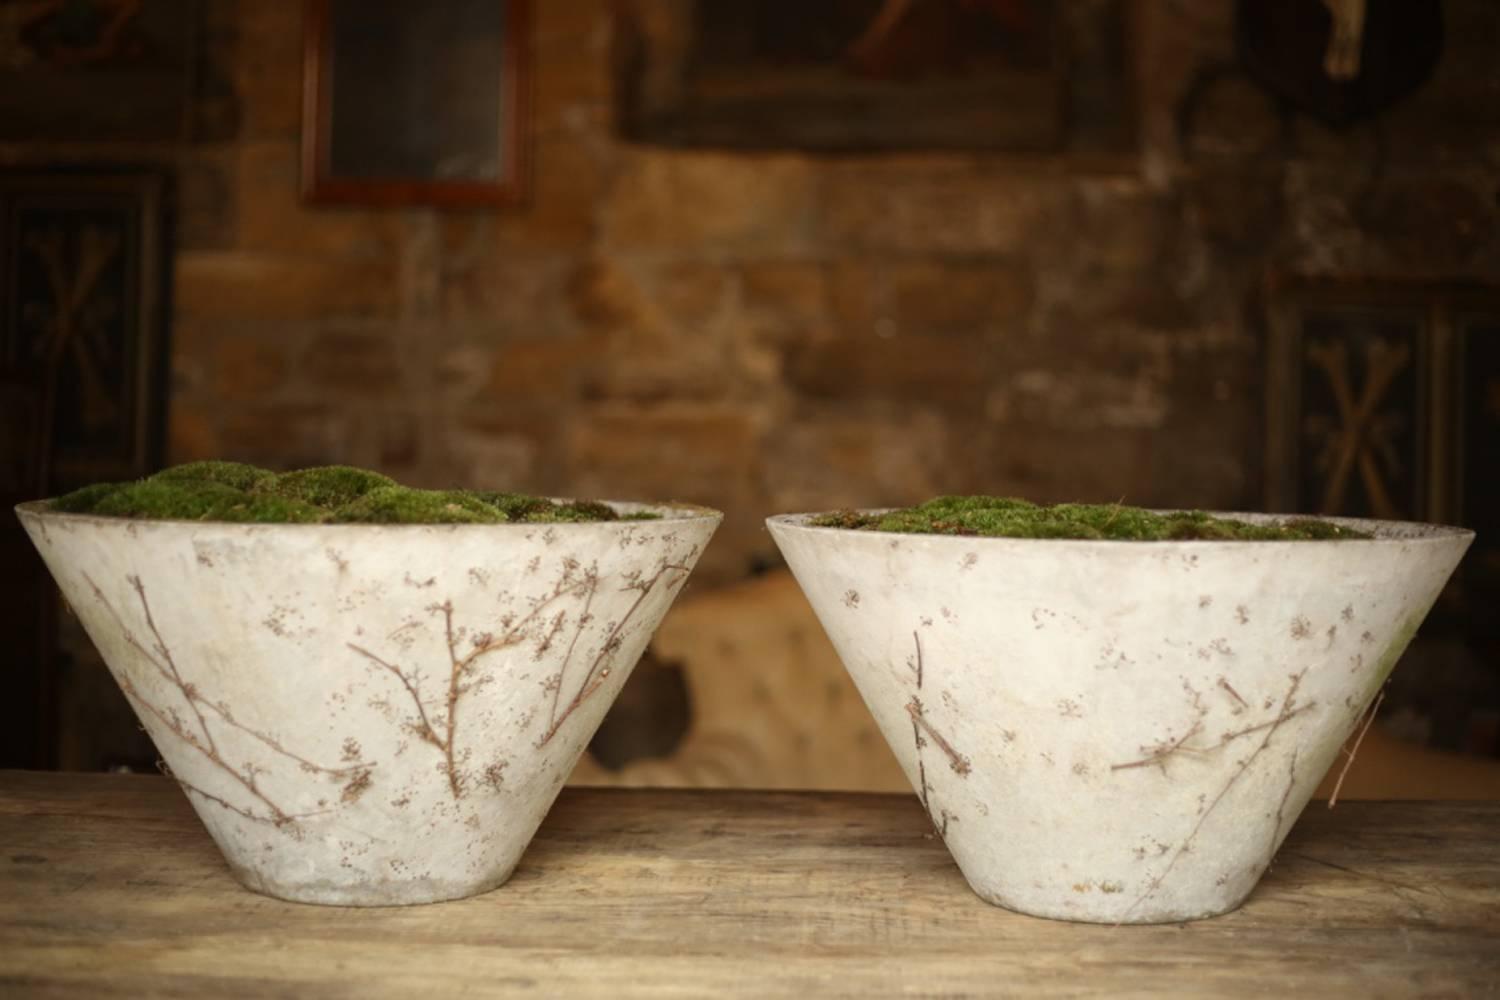 These are a very stylish pair of mid-20th century fibre concrete planters by the renowned designer Willy Guhl (1915-2004). The simplicity of the design is what makes these so attractive for both interior and exterior use. I have planted these out